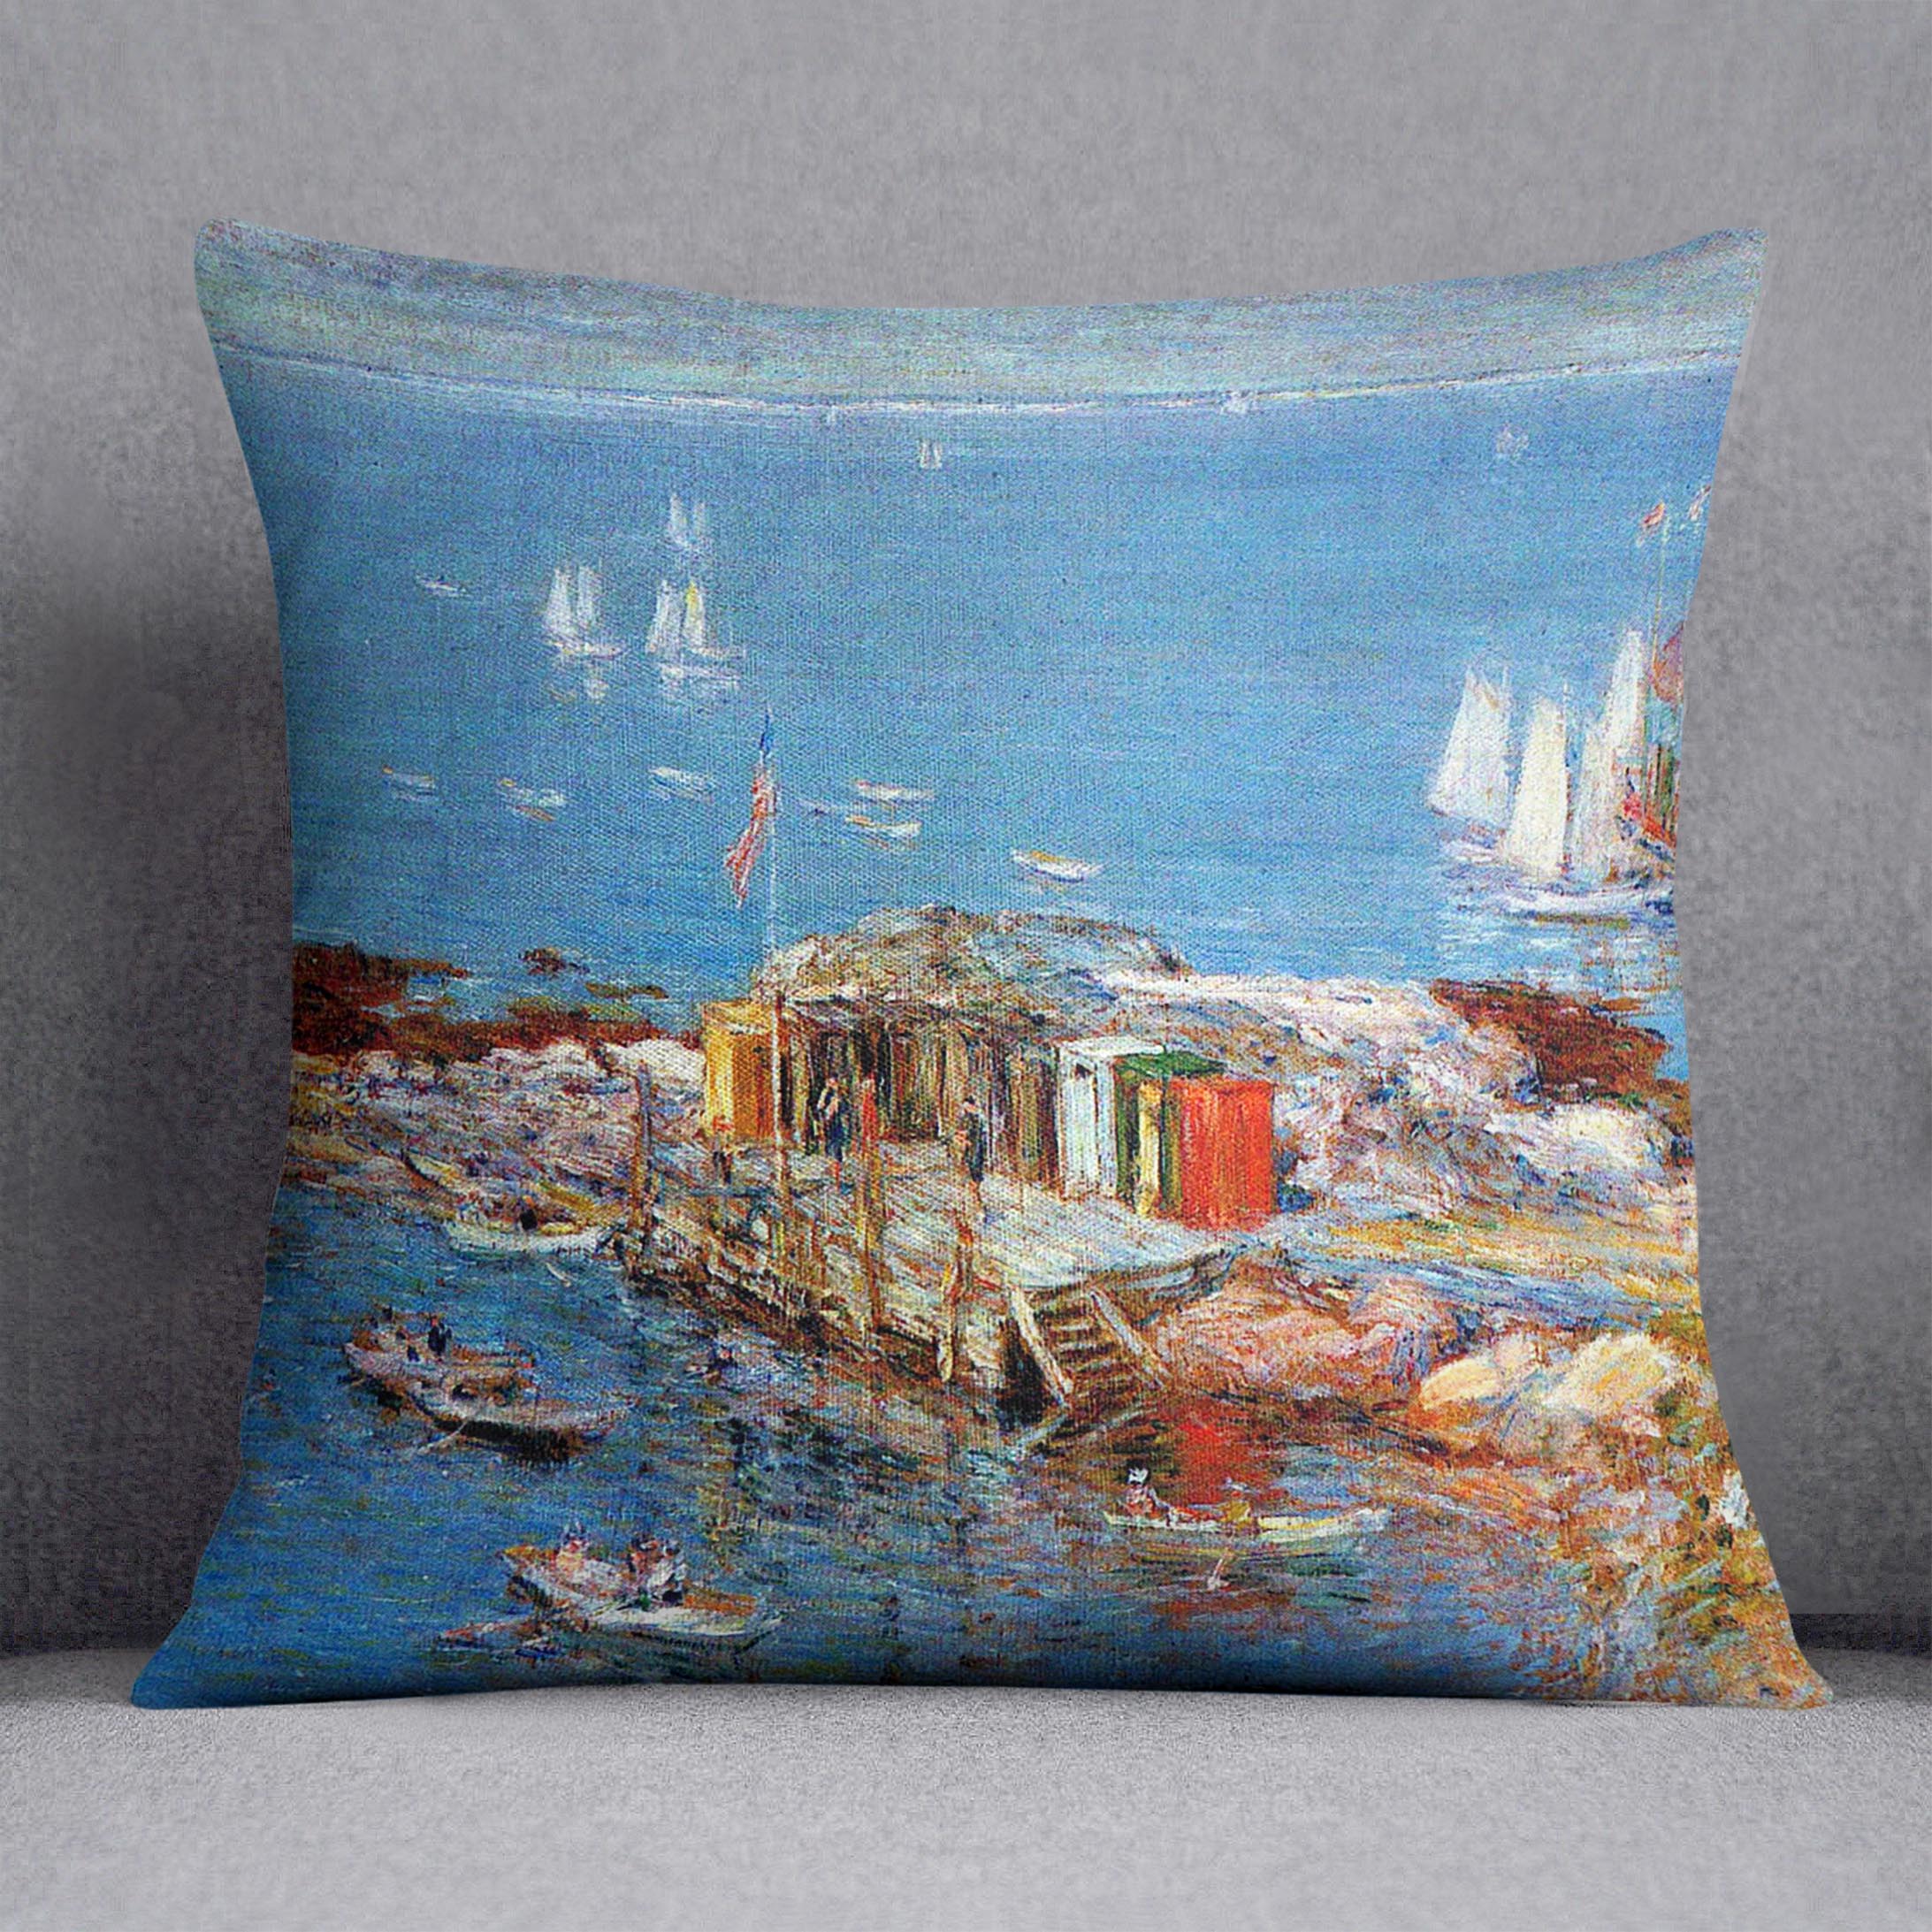 Afternoon in August Appledore by Hassam Cushion - Canvas Art Rocks - 1